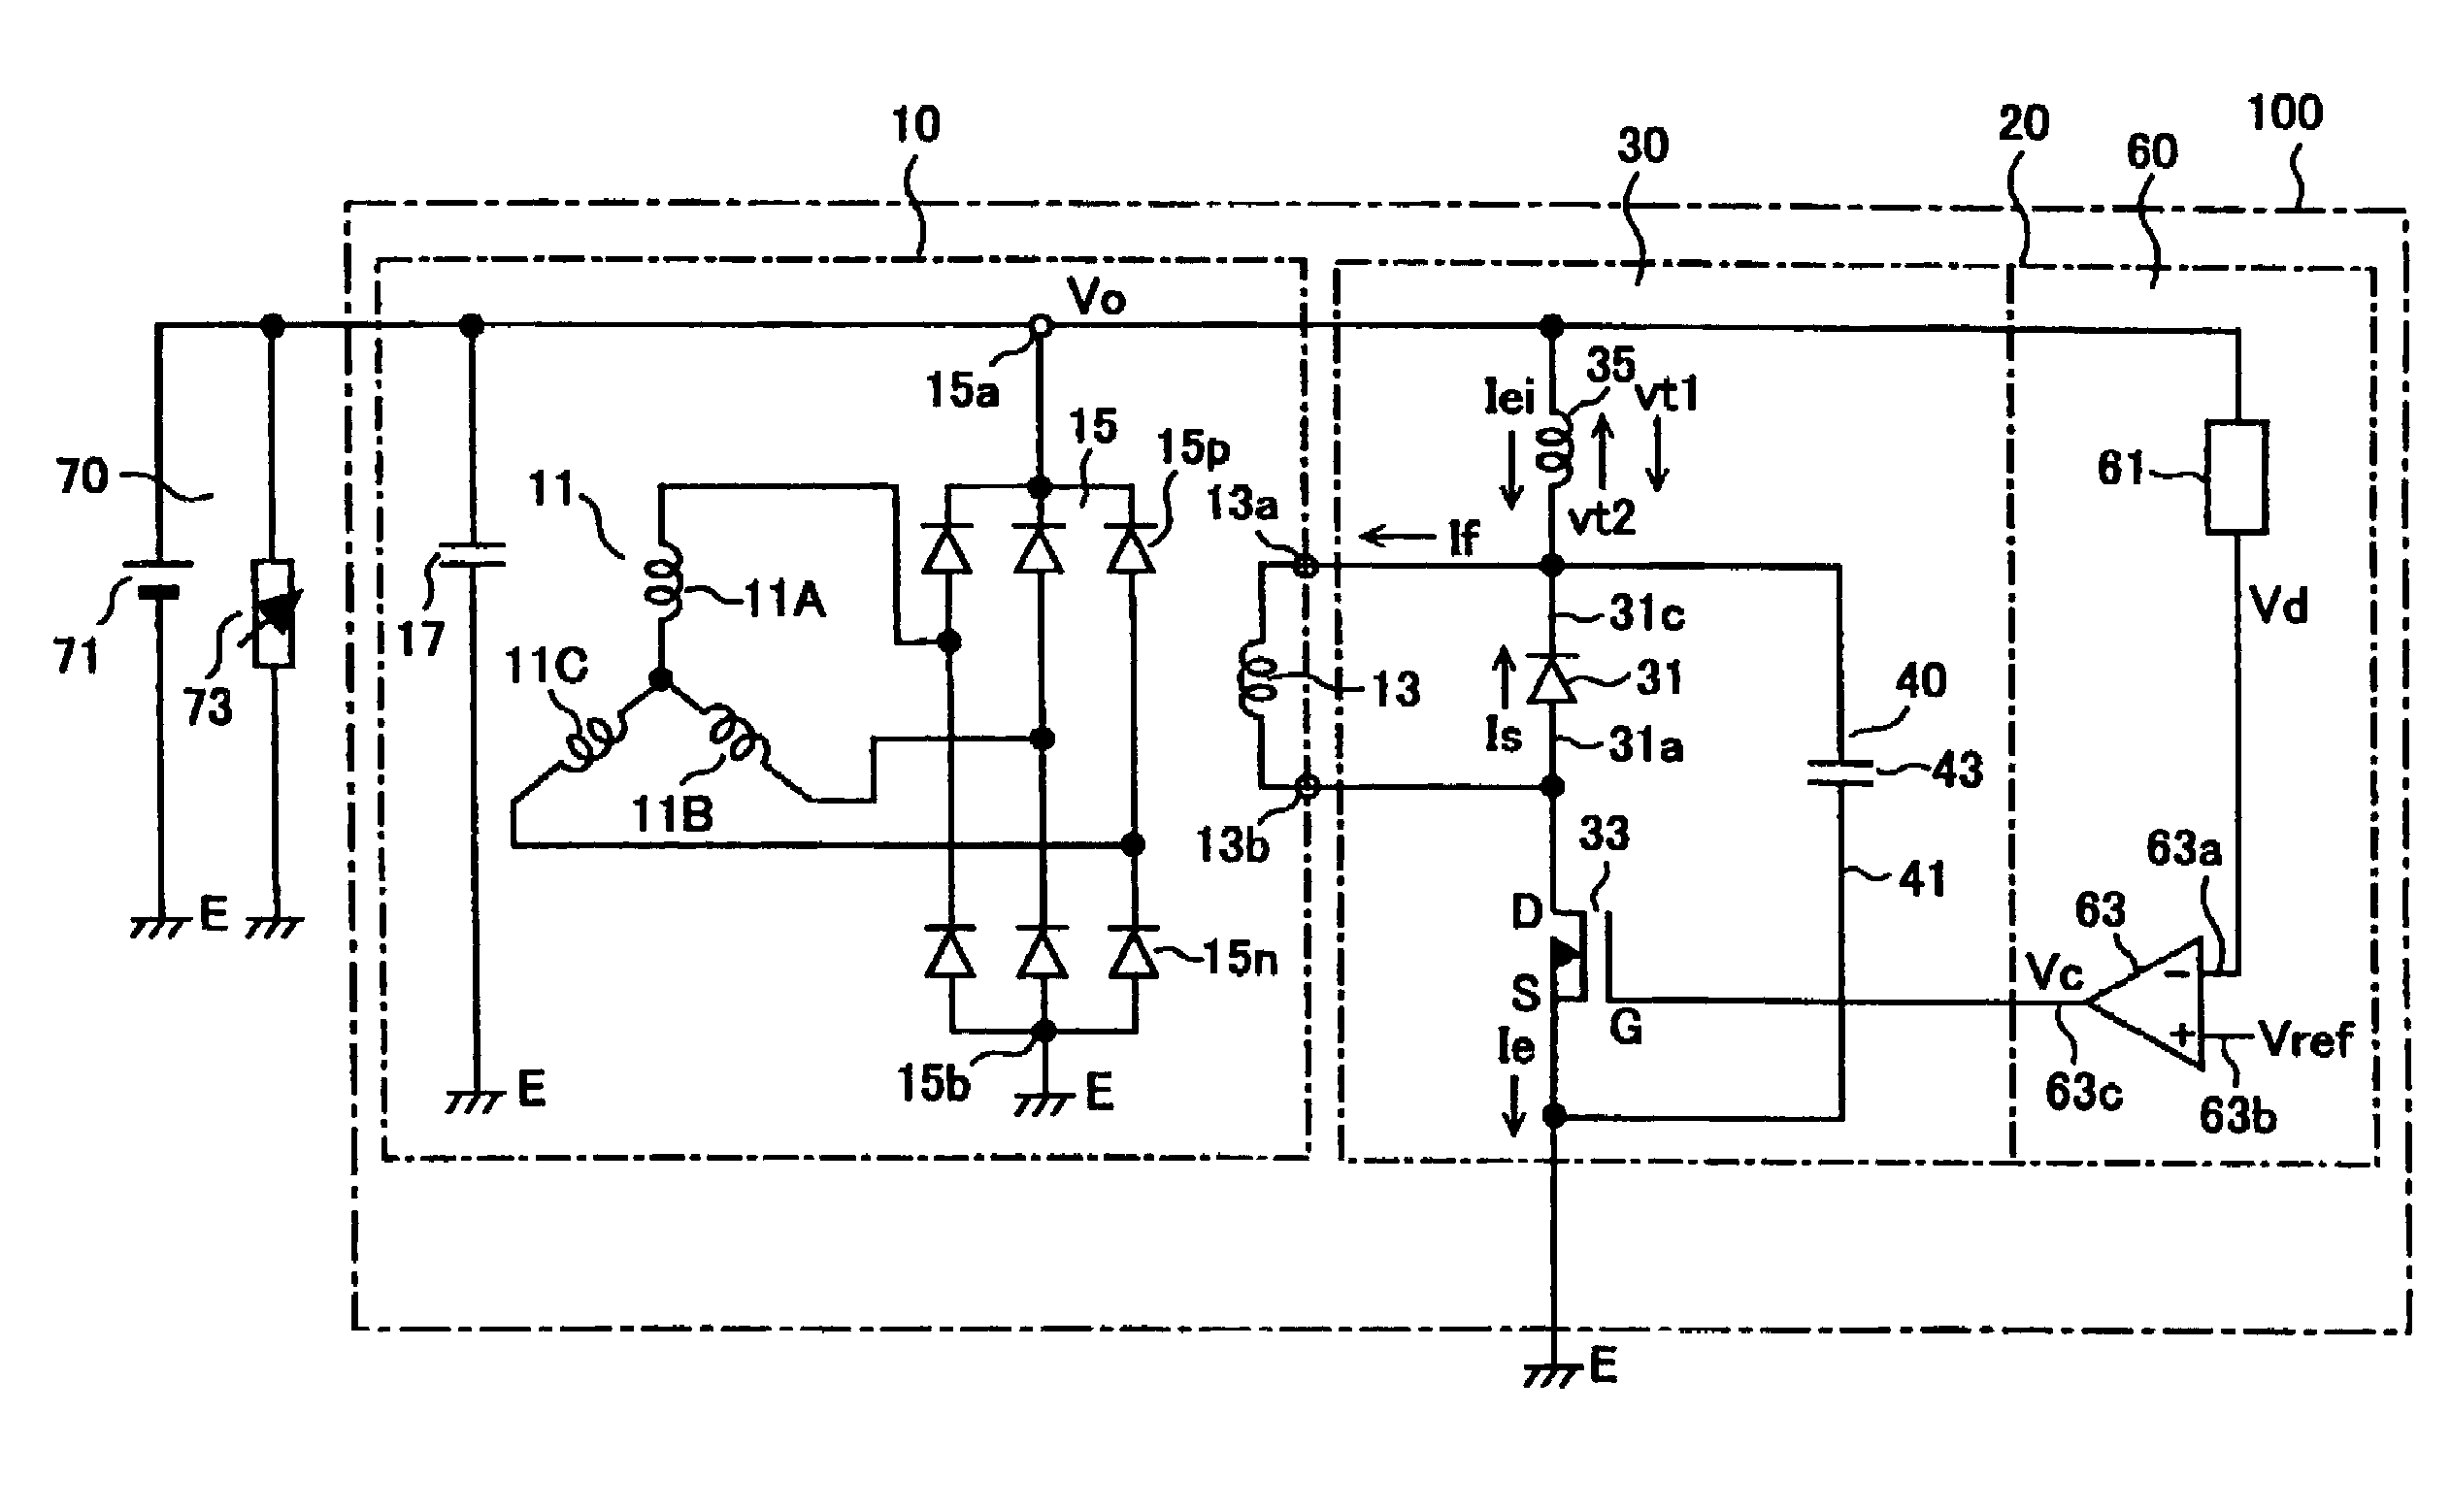 Output voltage controller for AC vehicle generator